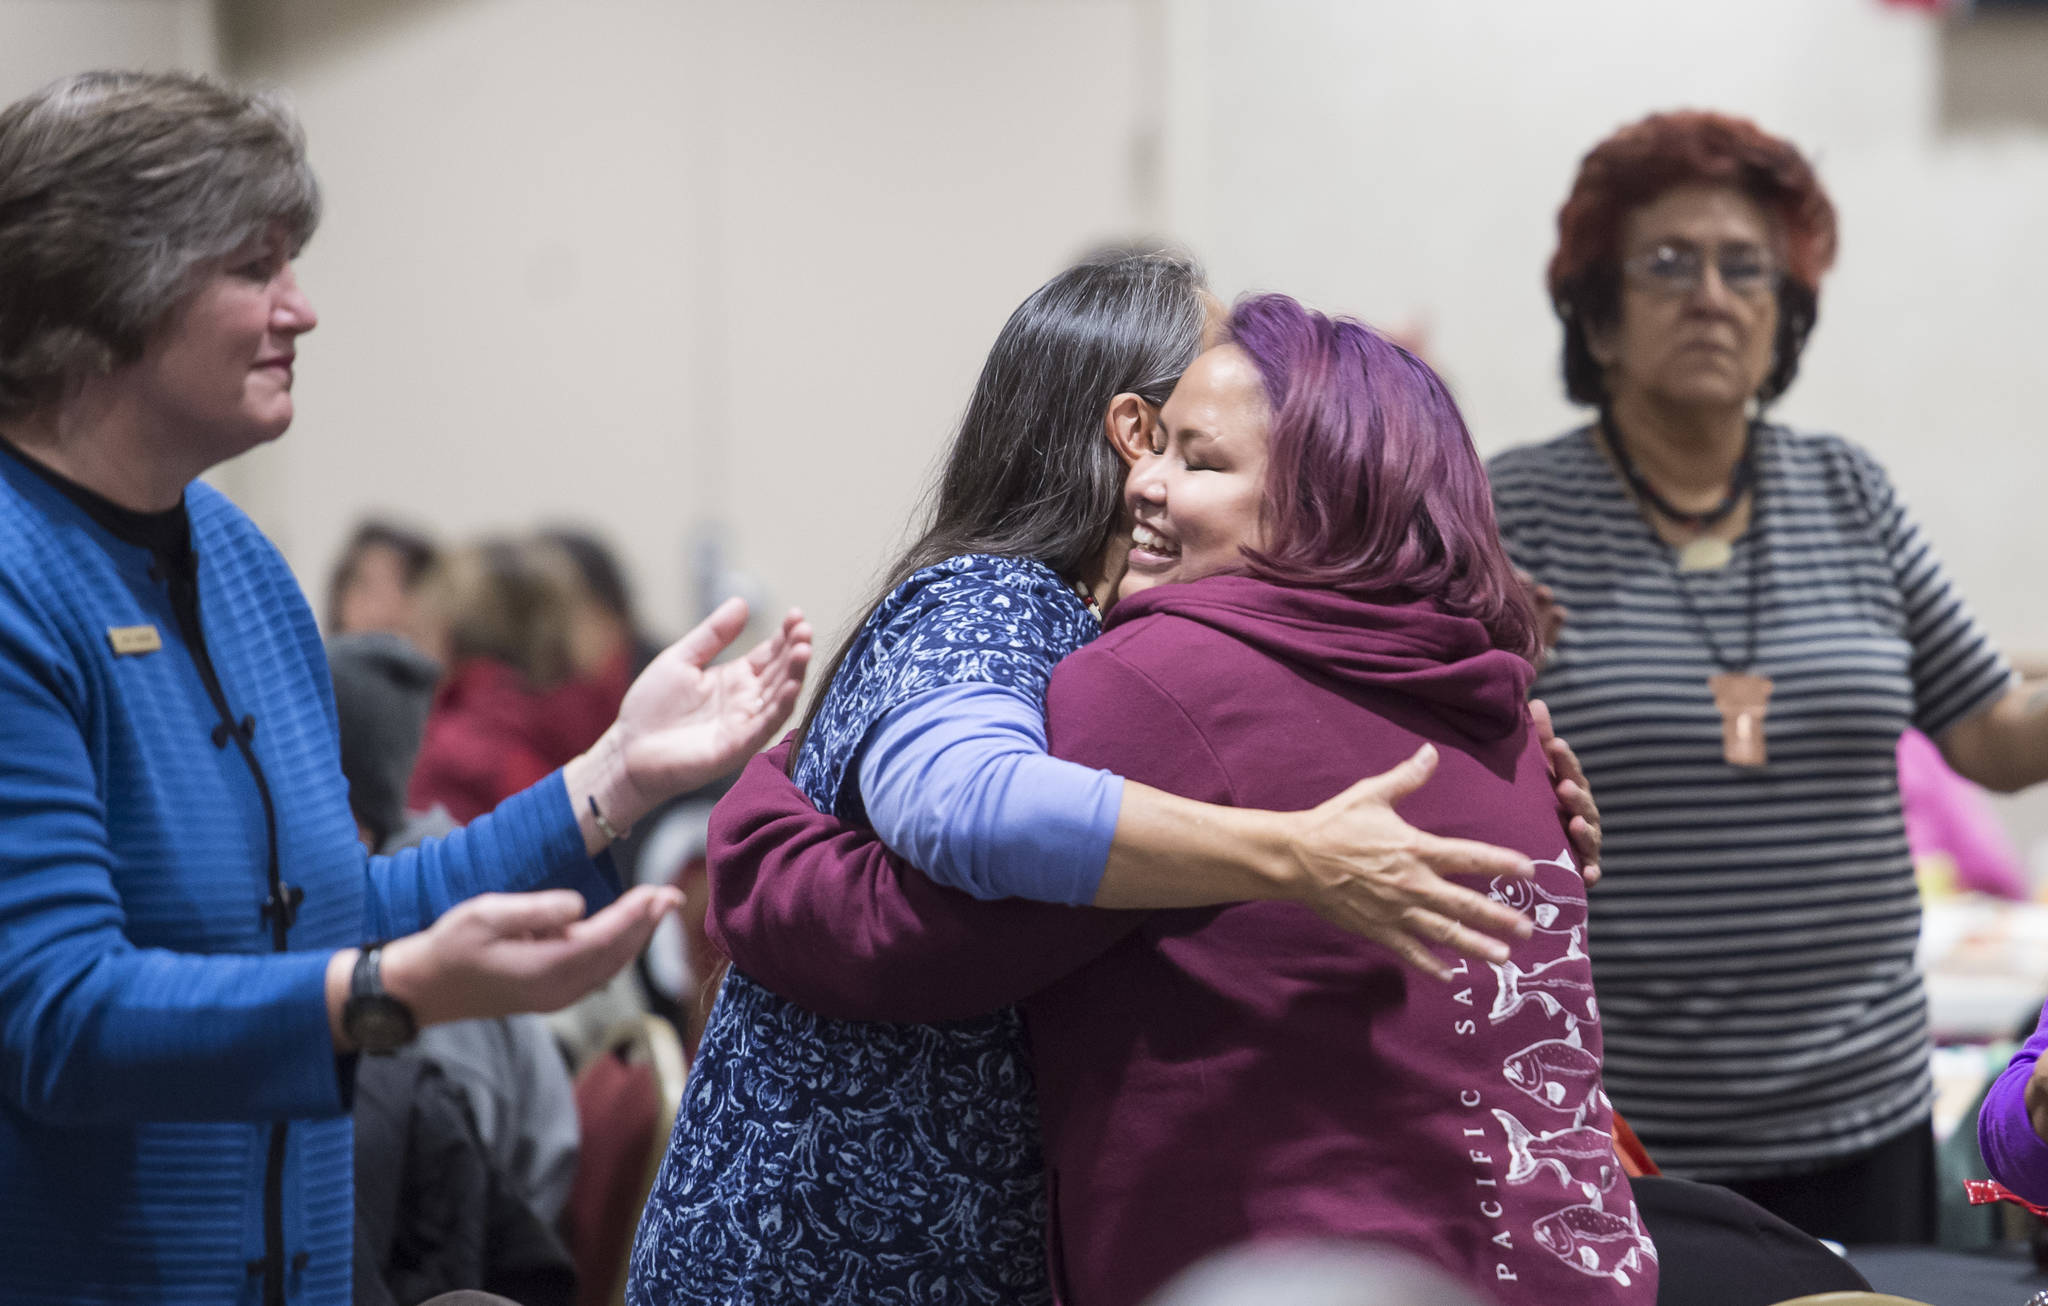 People attend a Celebrate Survivors gathering sponsored by Central Council Tlingit and Haida Indian Tribes of Alaska and AWARE in the Elizabeth Peratrovich Hall on Tuesday, Oct. 23, 2018. October is Domestic Violence Awareness Month. (Michael Penn | Juneau Empire)